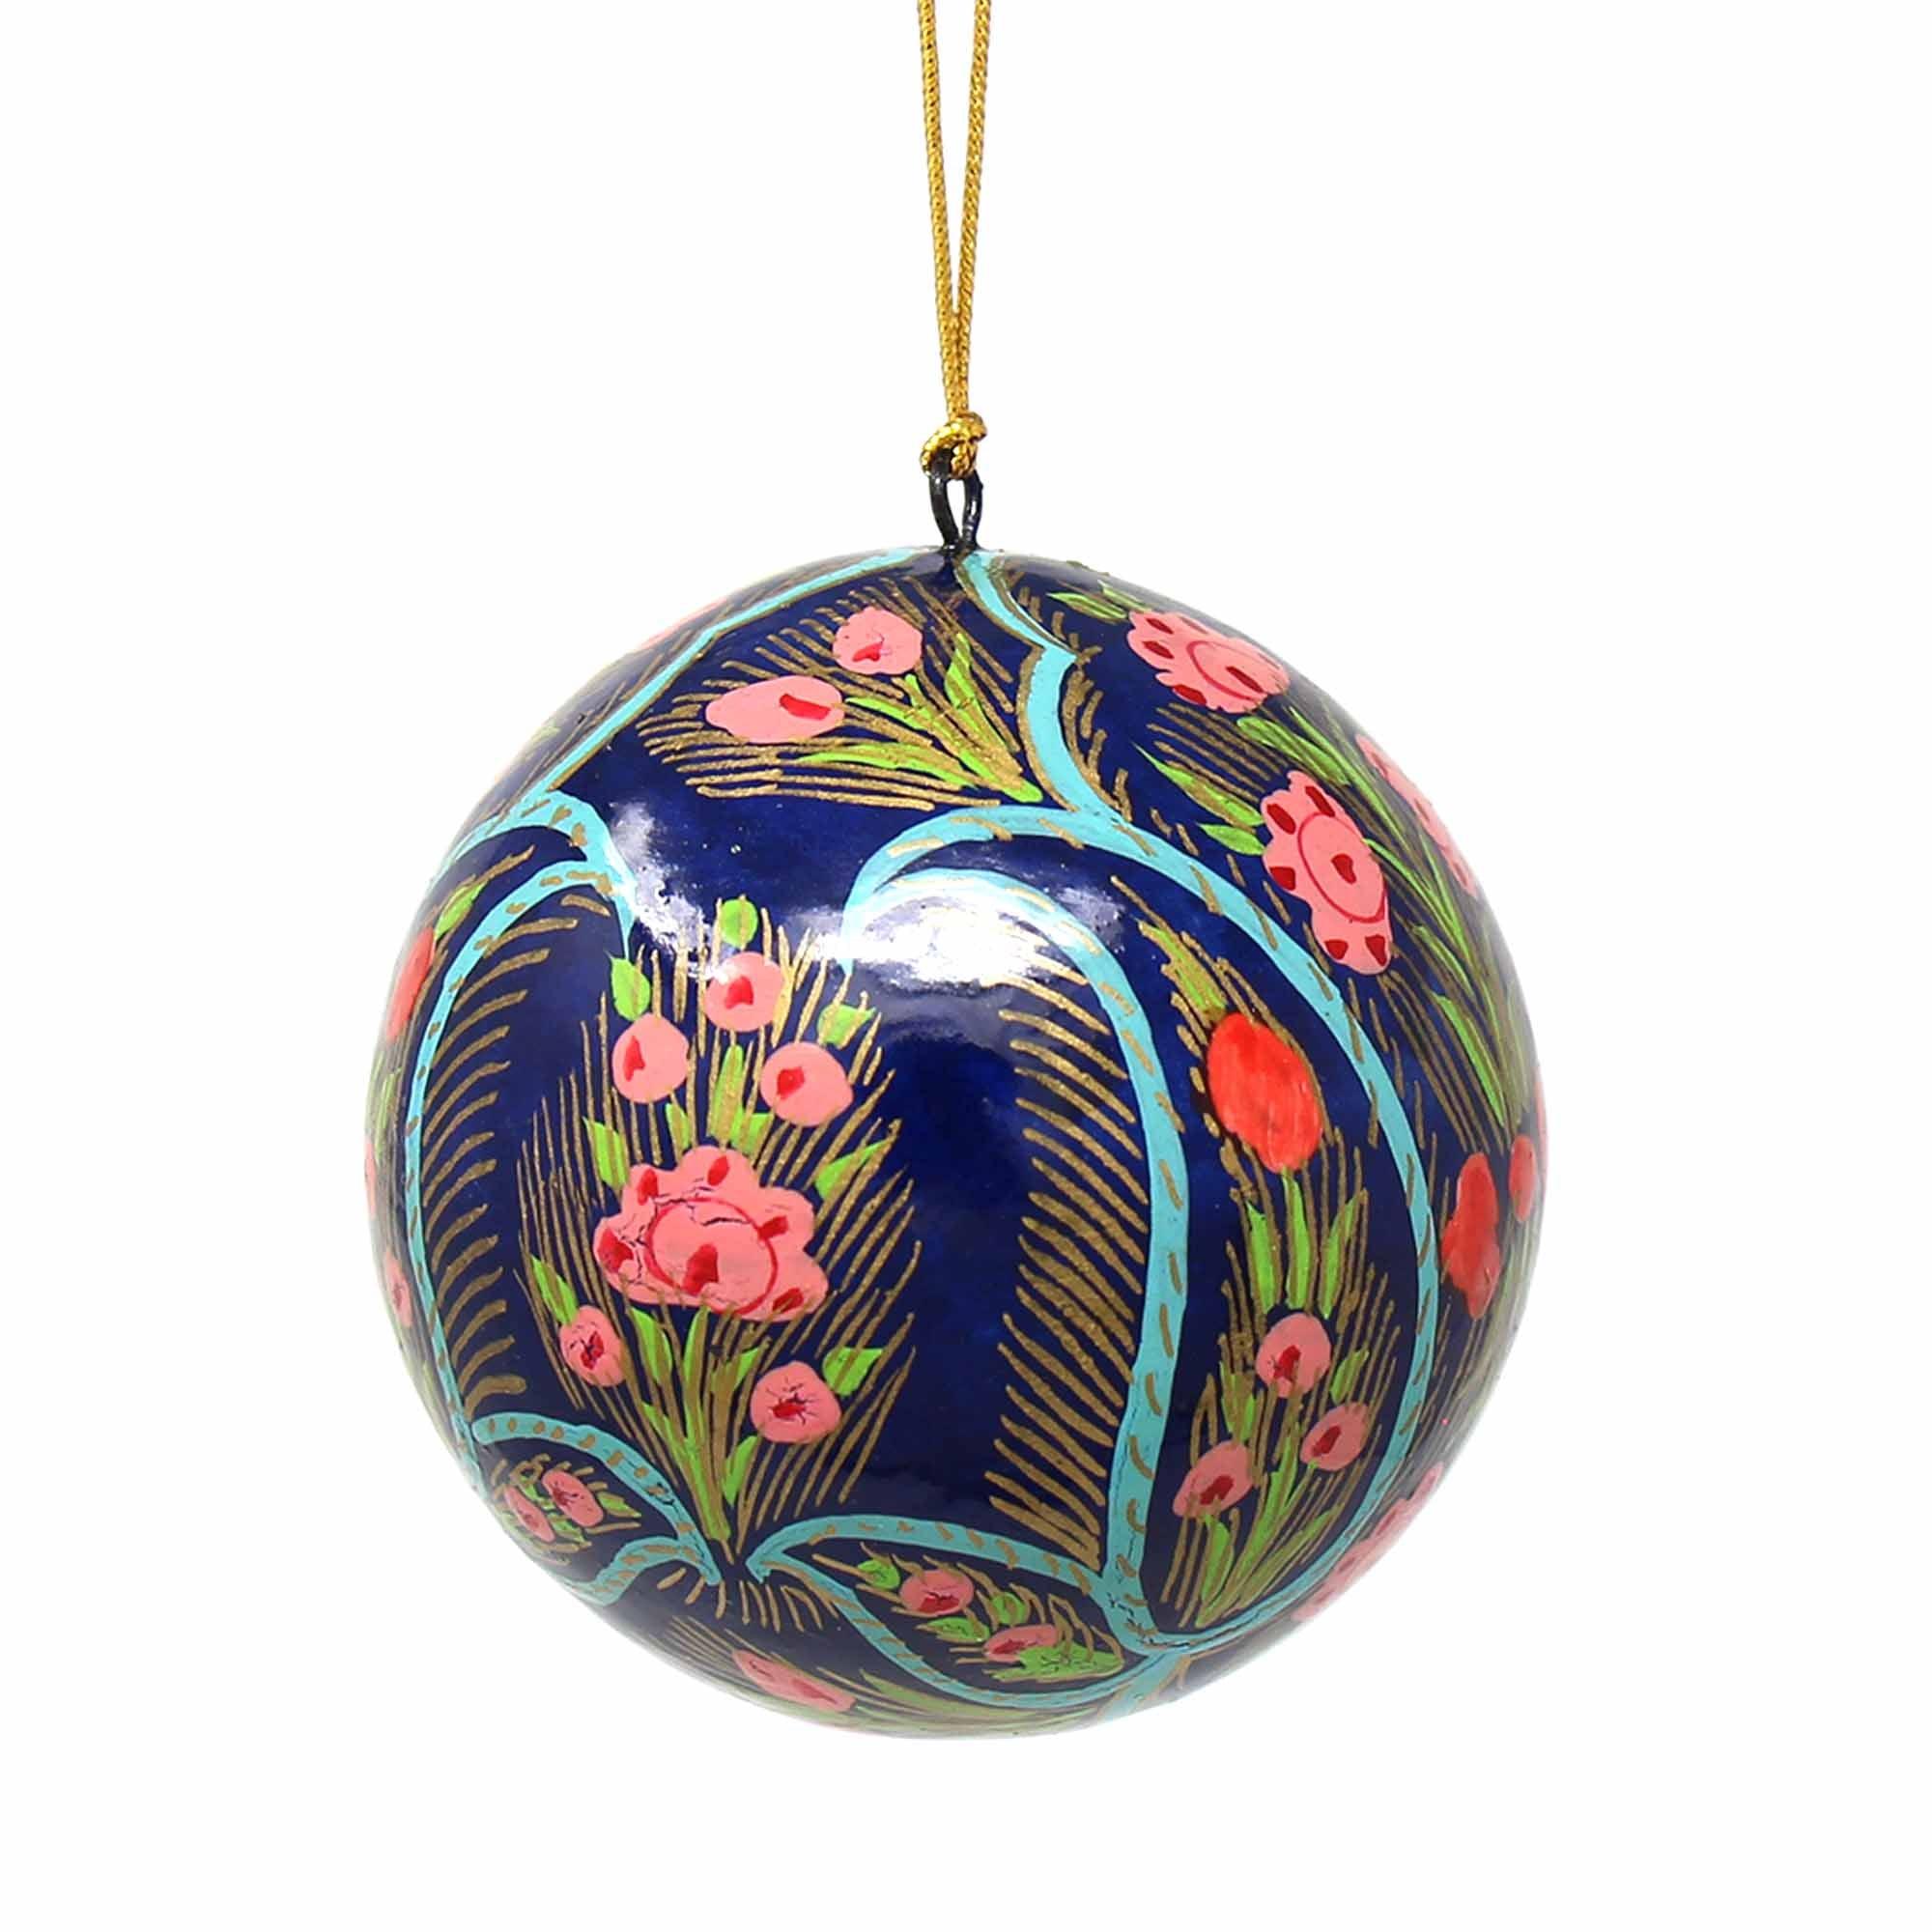 Handpainted Ornaments, Coral & Blue Floral - Pack of 3 - Flyclothing LLC